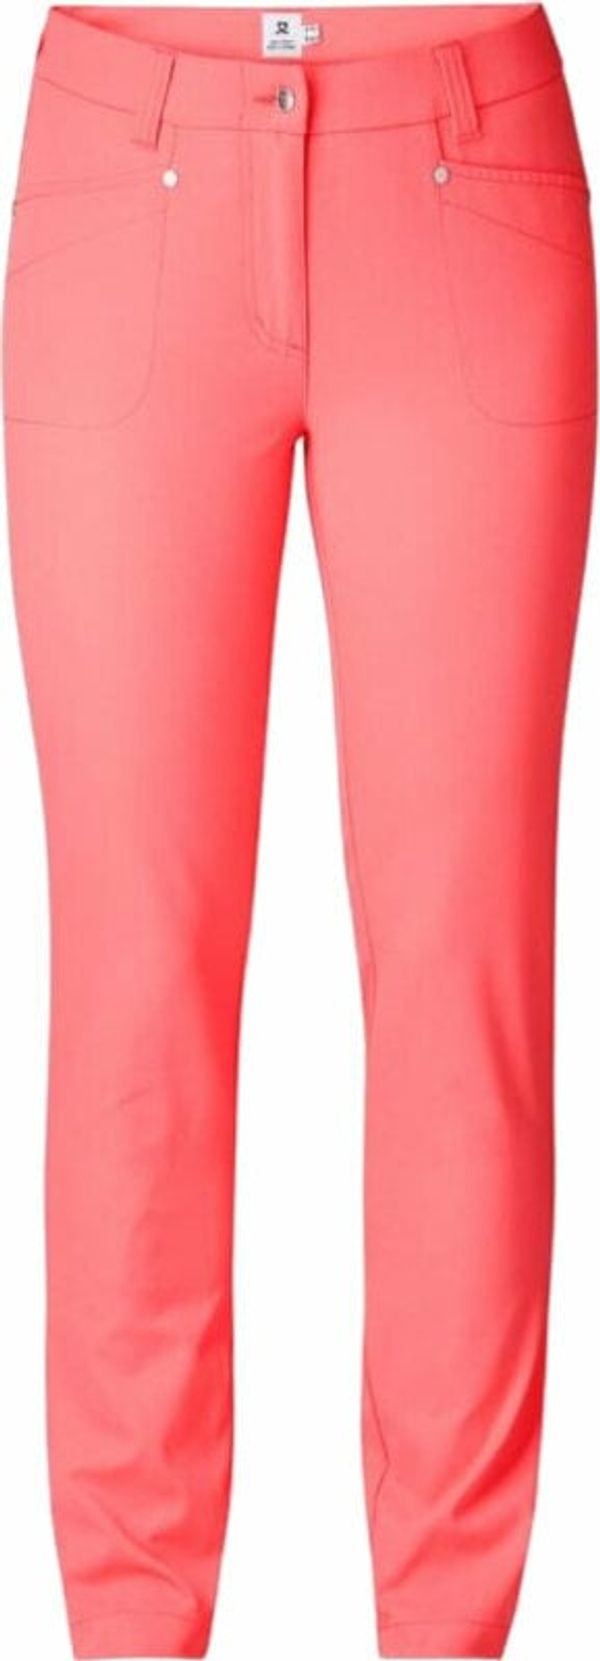 Daily Sports Daily Sports Lyric Pants 29" Coral 34